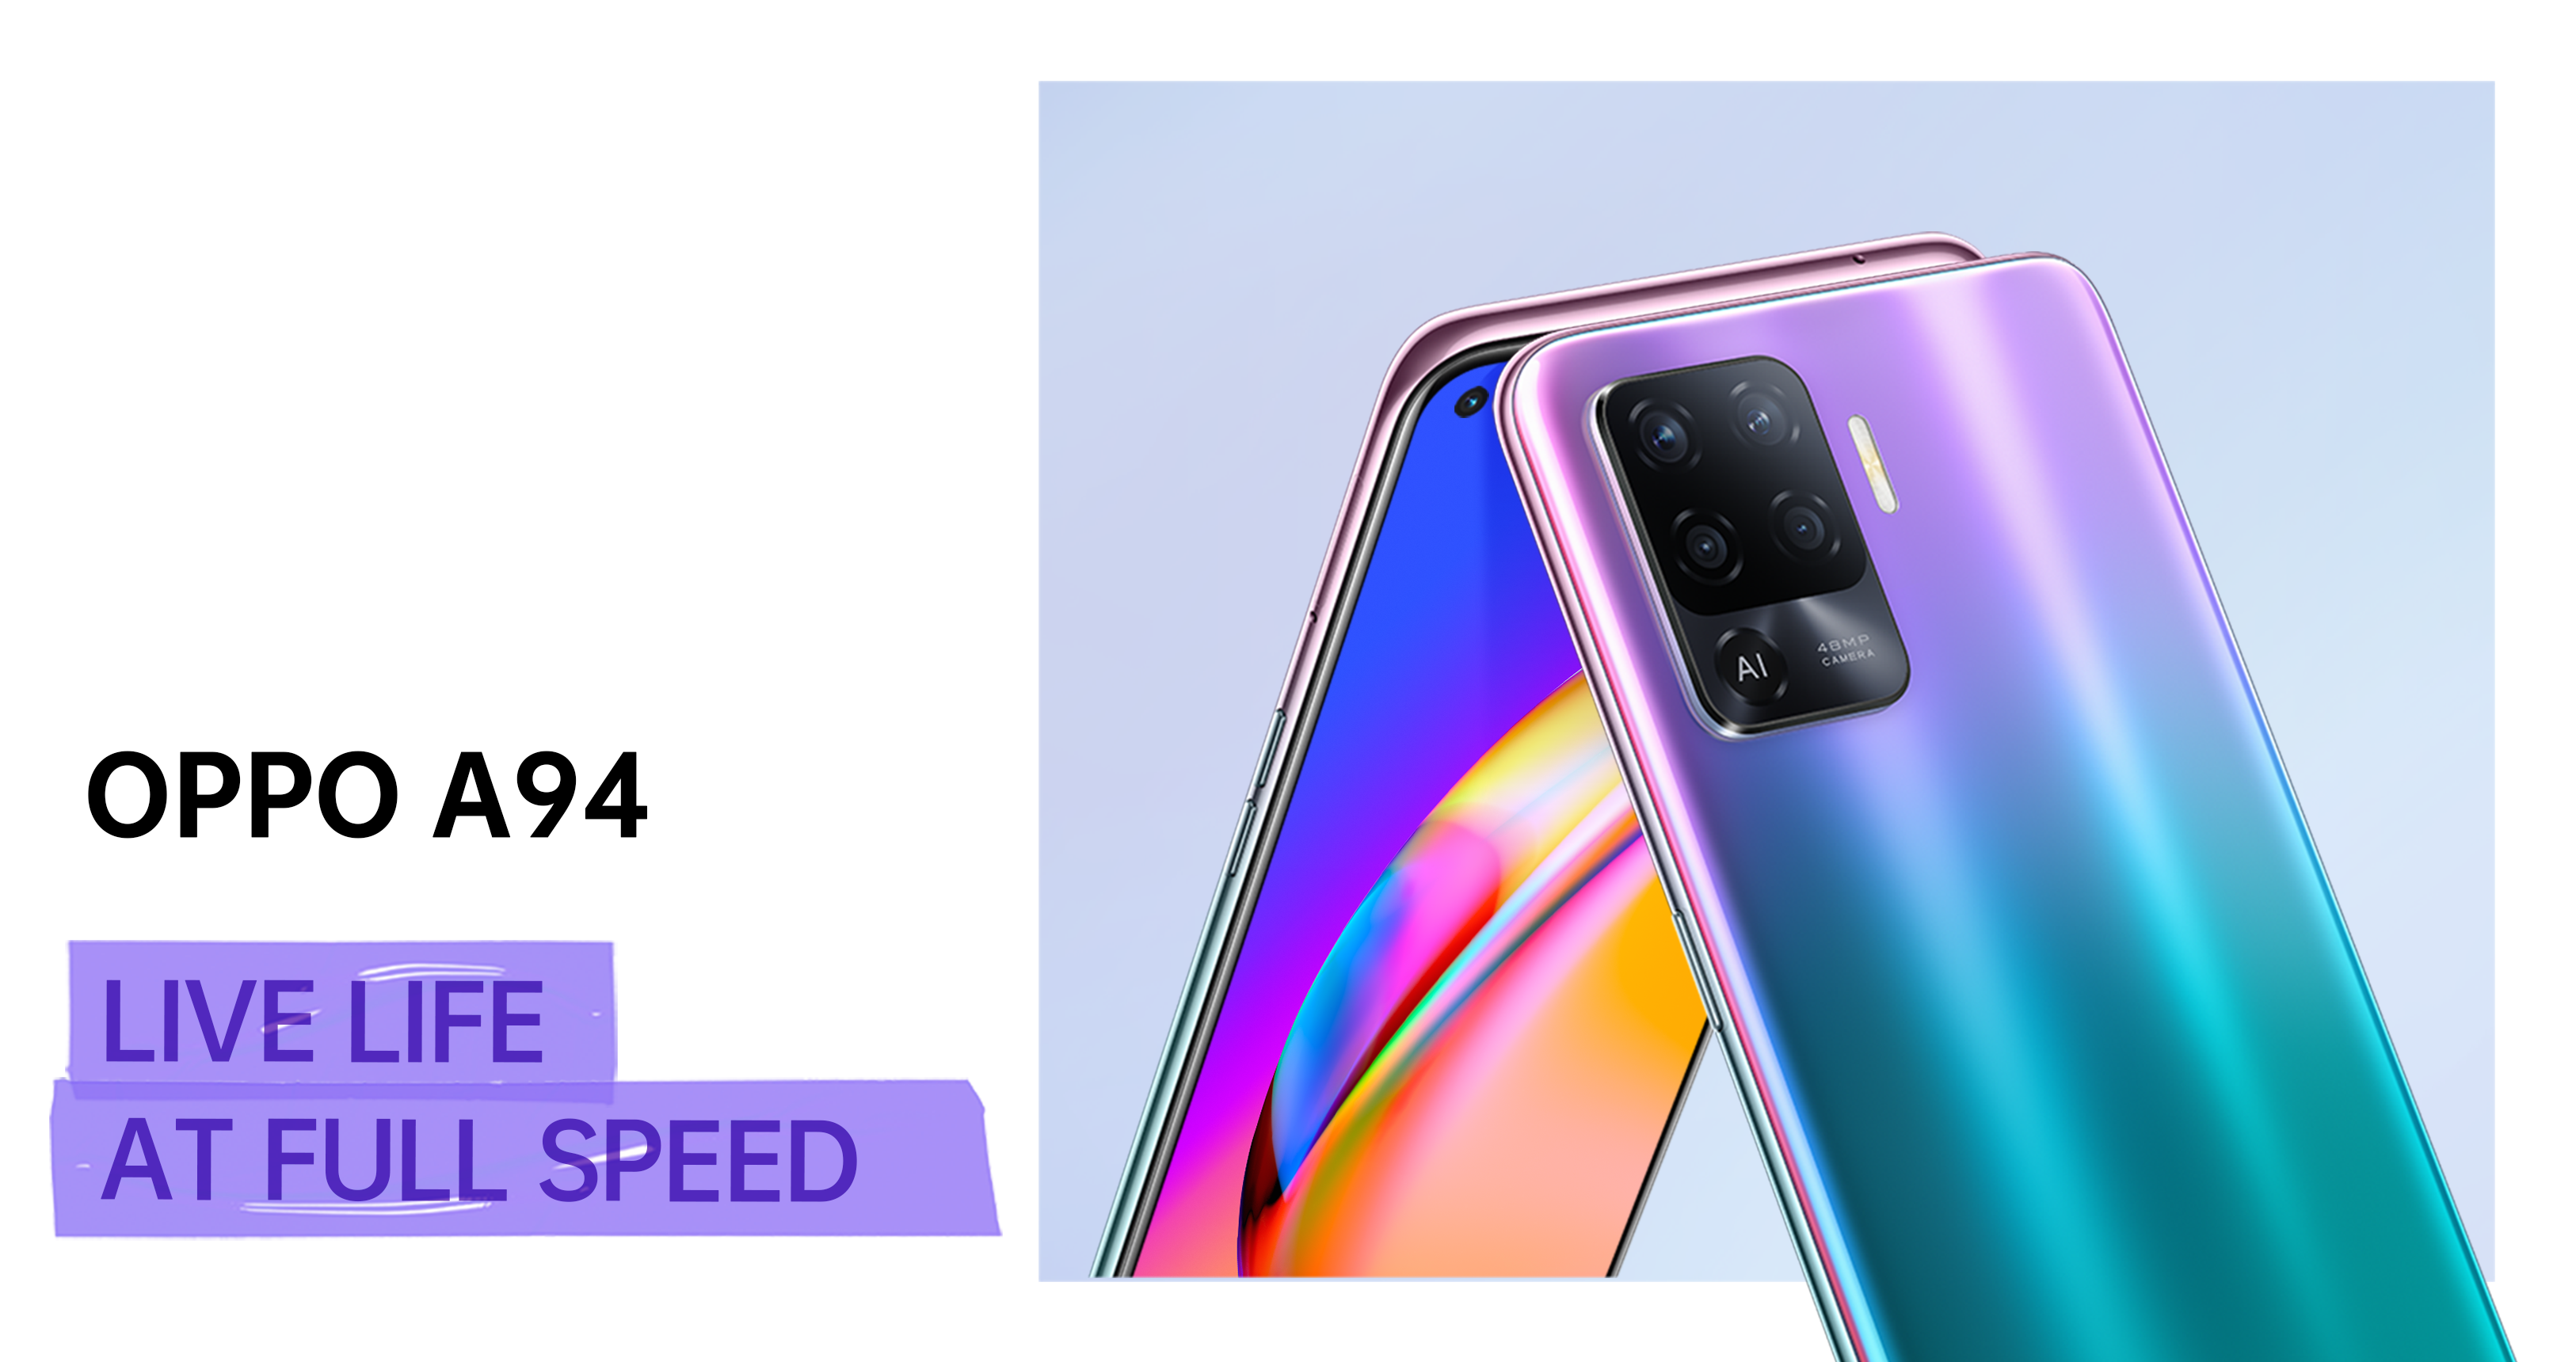 OPPO A94 Live Life At Full Speed